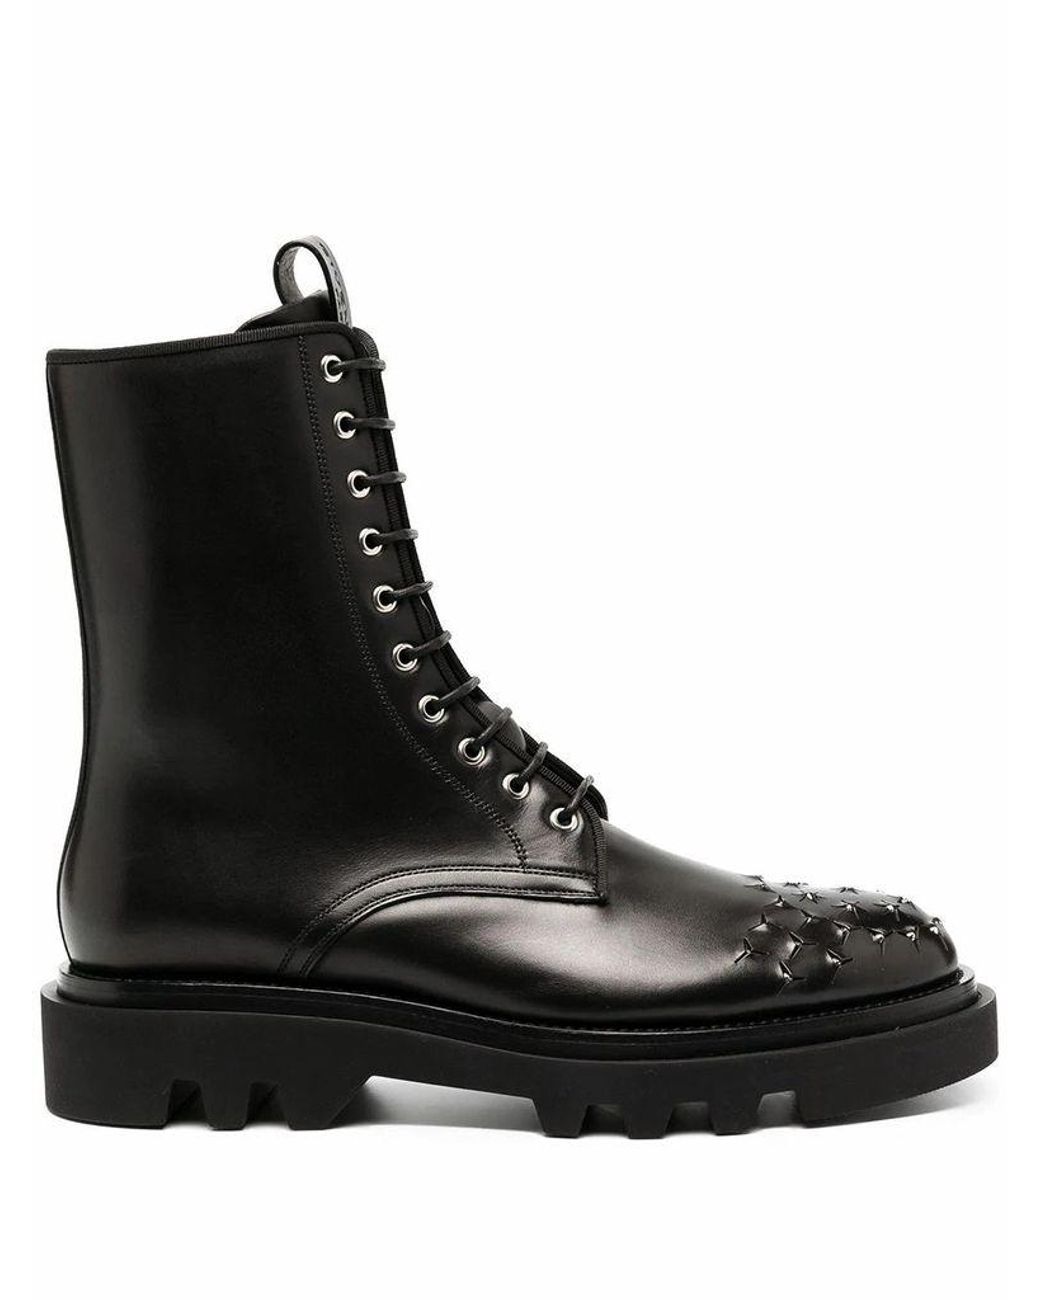 Givenchy Men's Bh6027h0kf001 Black Leather Ankle Boots for Men - Lyst